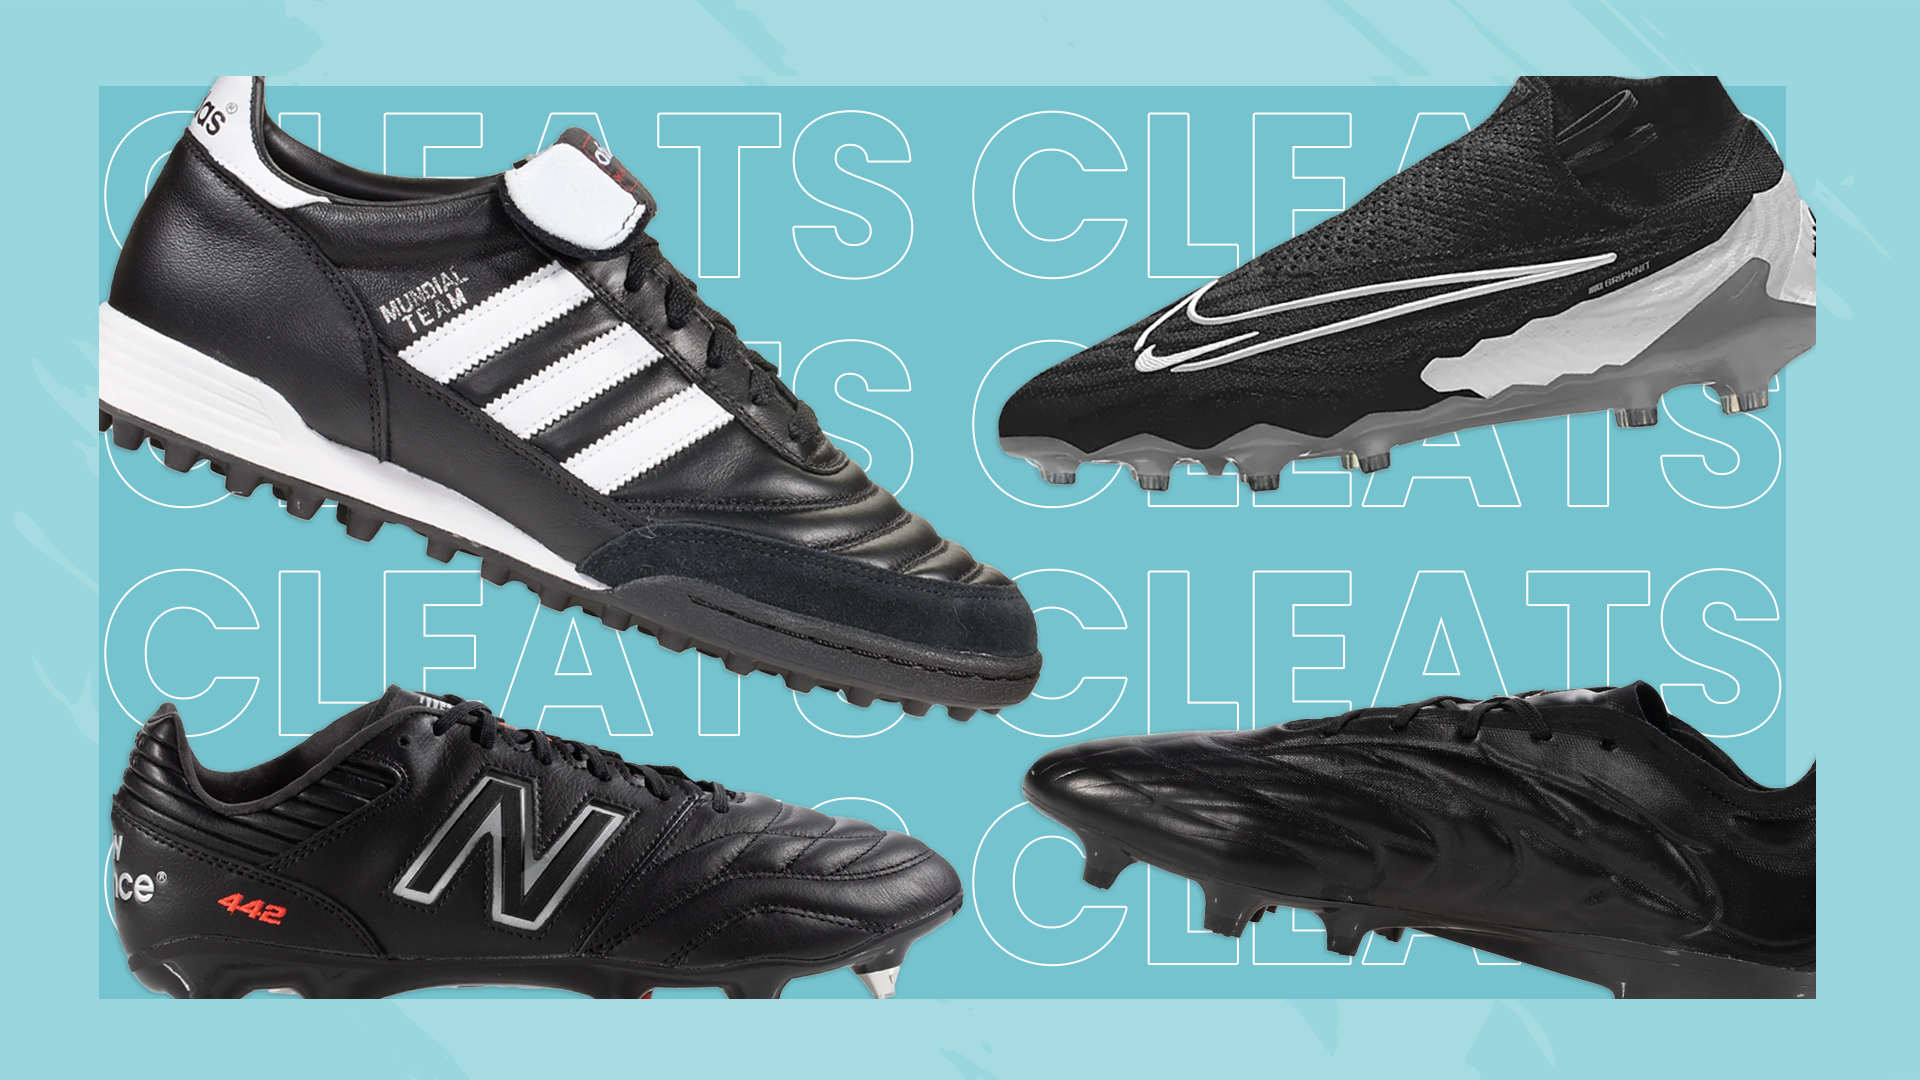 The Best Soccer Shoes in 2019